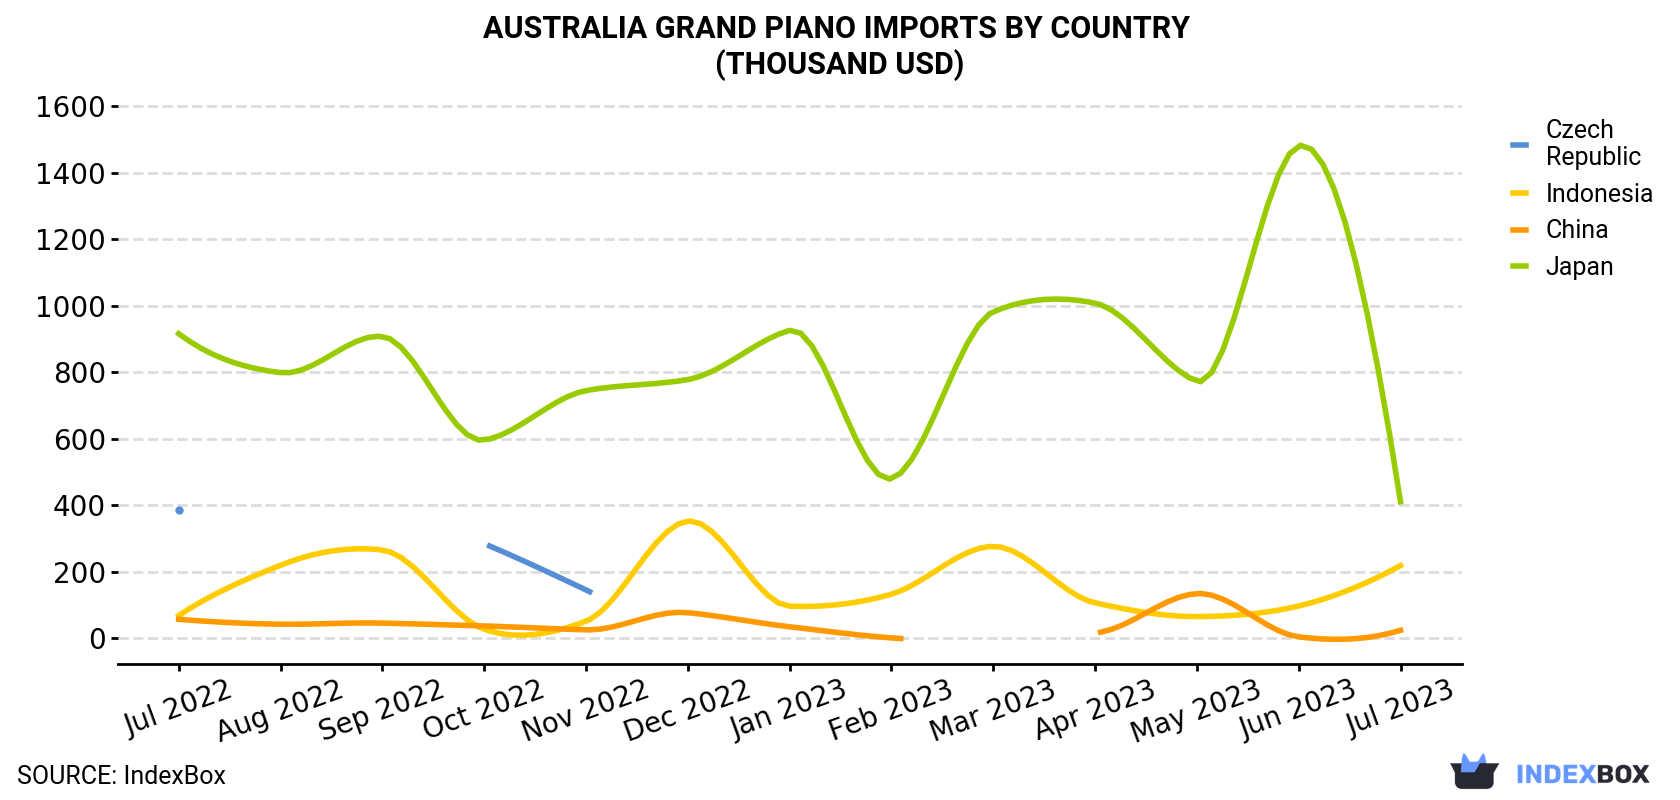 Australia Grand Piano Imports By Country (Thousand USD)